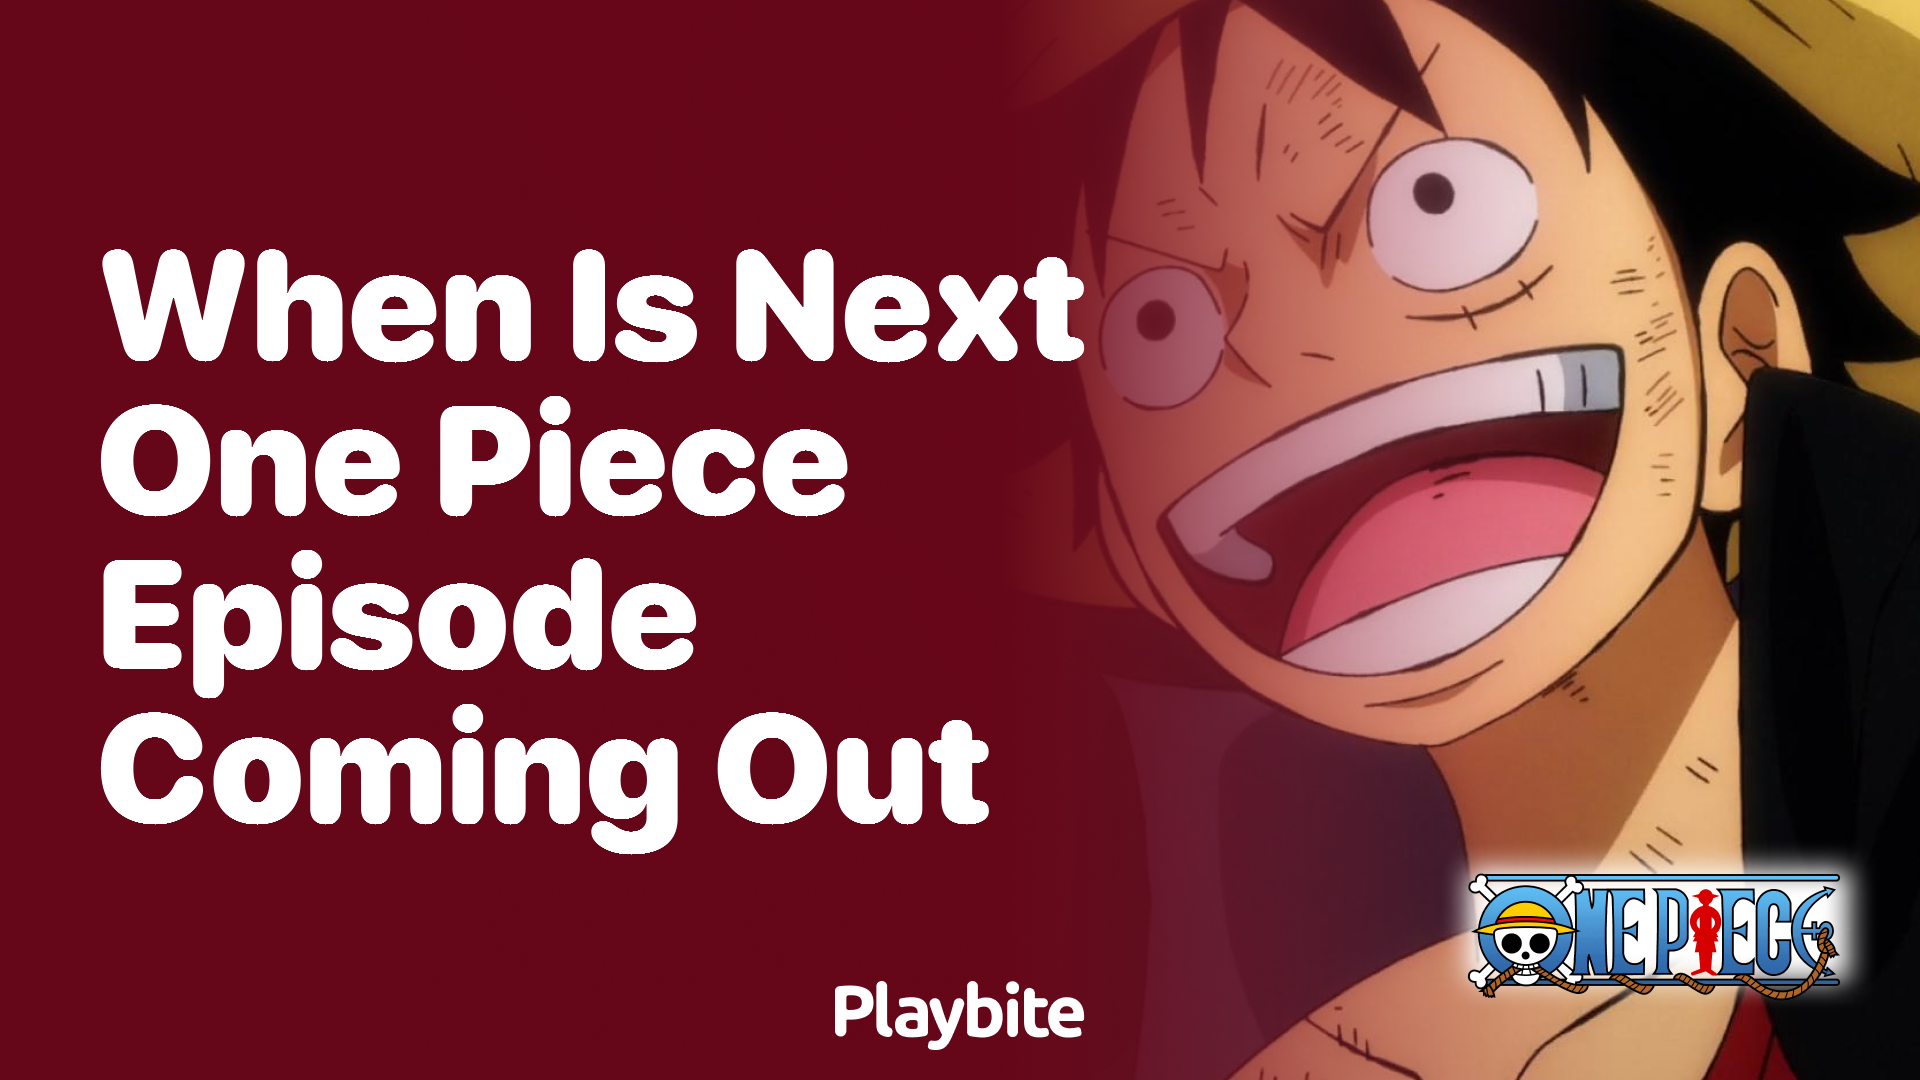 When is the next One Piece episode coming out?